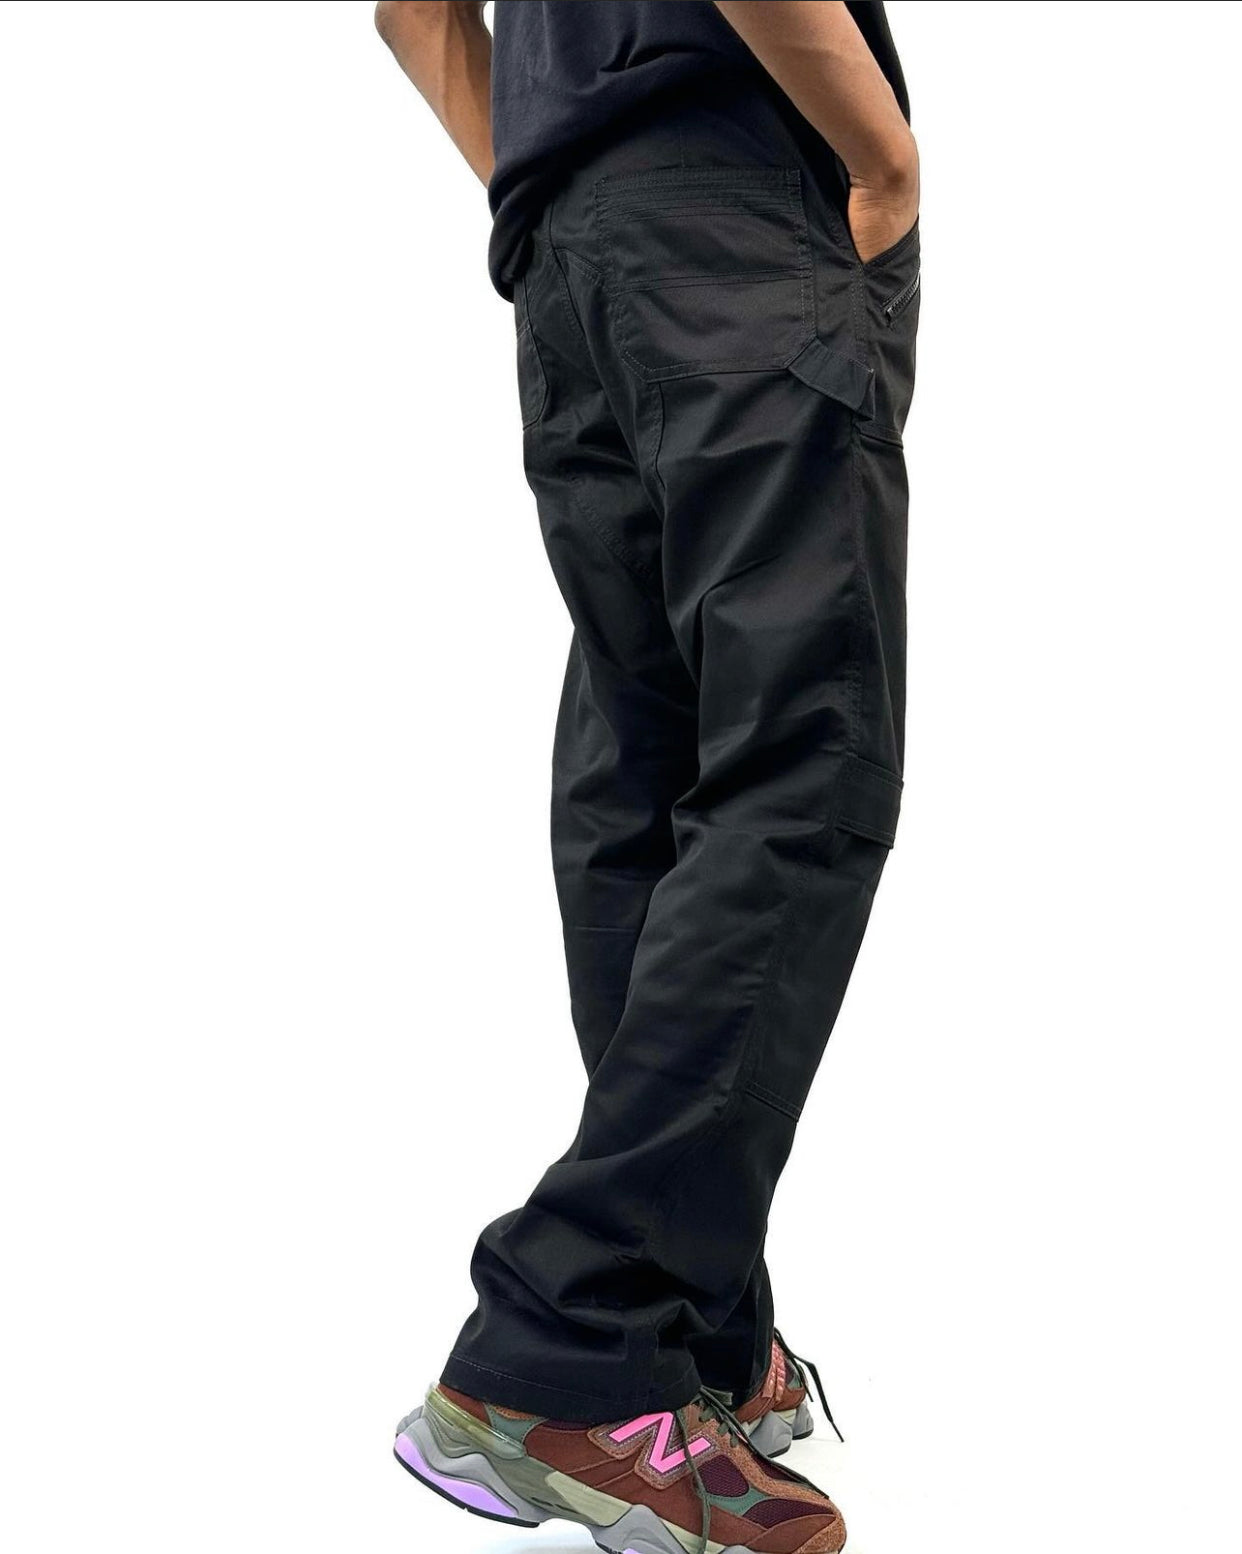 Taille pants in black